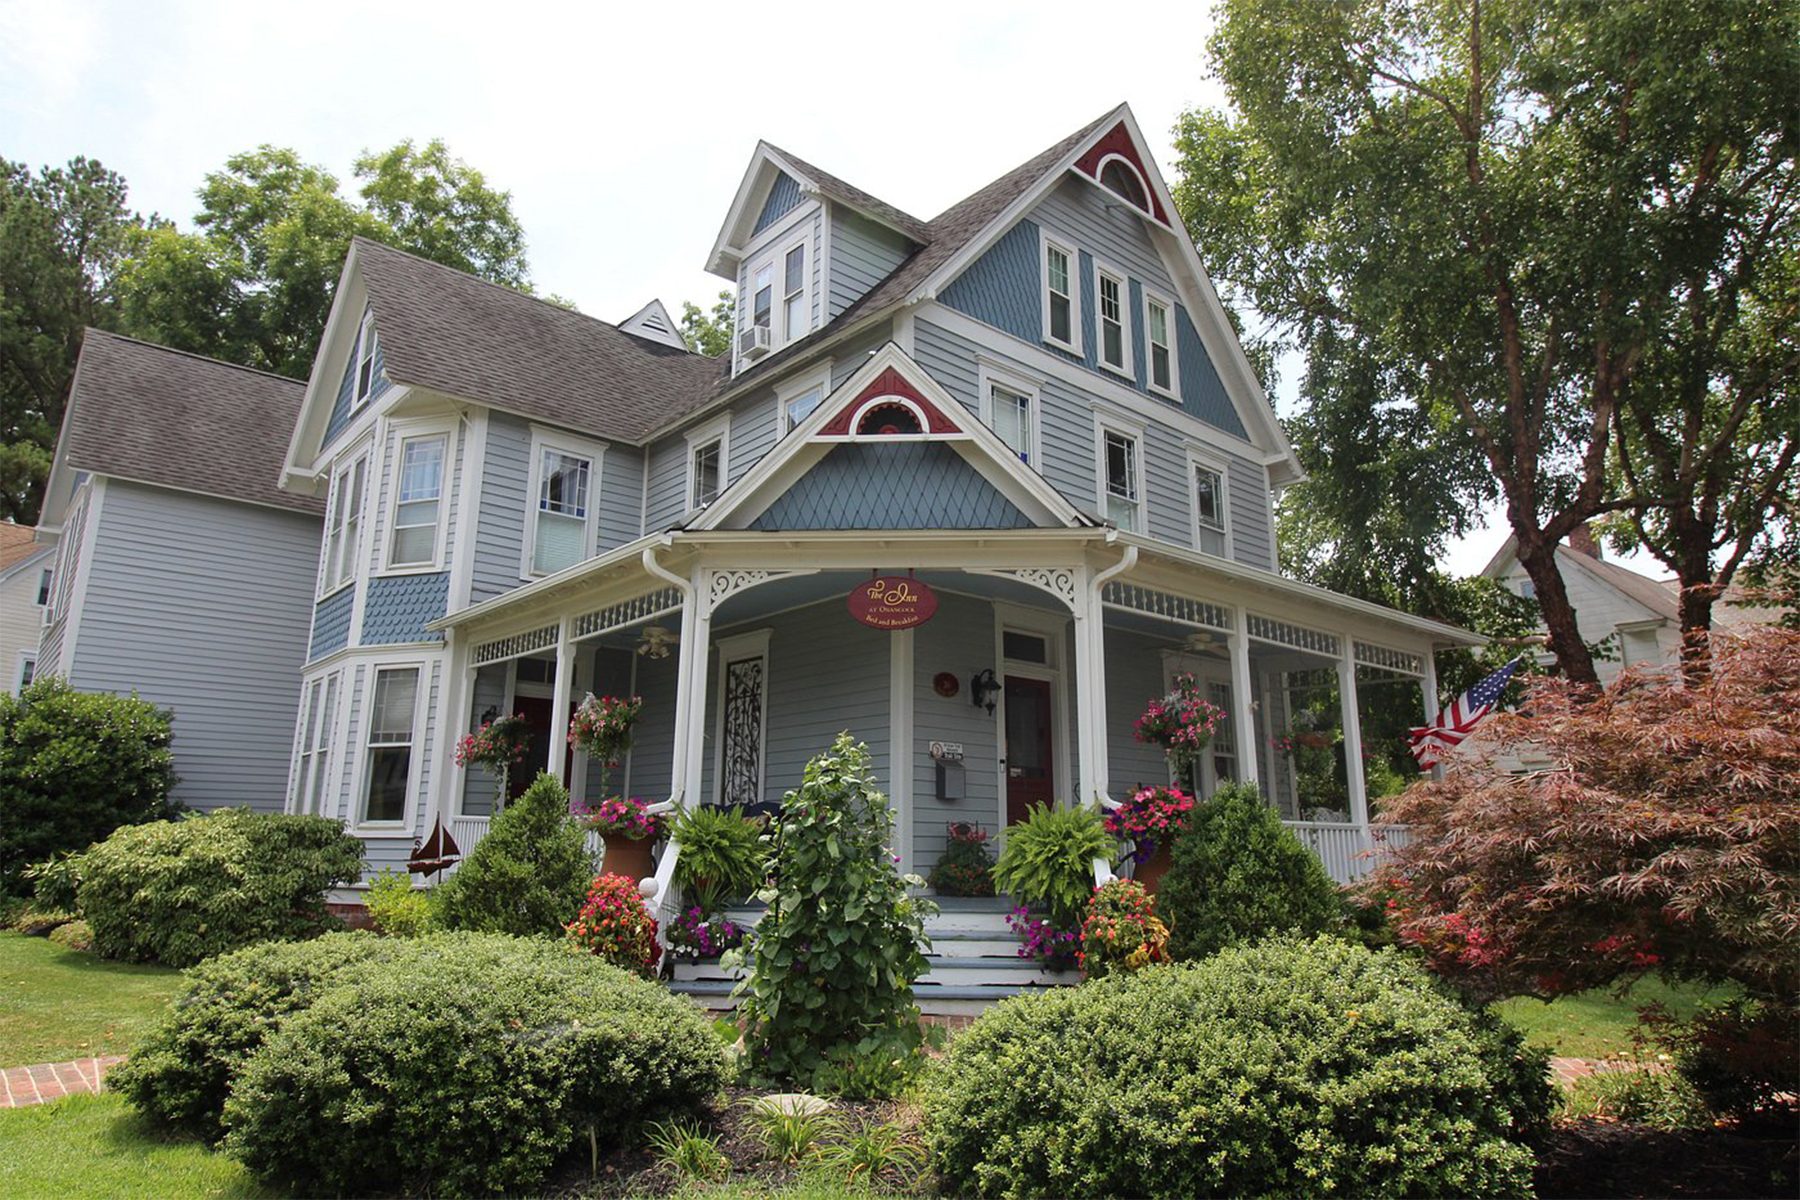 <h3 class="">Onancock, Virginia</h3> <p class=""><strong>Best for: </strong>A casual coastal getaway in a charming harbor town</p> <p>This intimate bed-and-breakfast, located in a Victorian-era home in the walkable historic district, offers just five accommodations. Each room at the <a href="https://www.tripadvisor.com/Hotel_Review-g58044-d649709-Reviews-The_Inn_at_Onancock-Onancock_Virginia.html" rel="noopener">Inn at Onancock</a> has a theme (I stayed in the South of France–inspired Provence Room) and features a private spa-style bathroom and toiletries, spa robes, luxurious linens and a feather-topped queen- or king-size bed. Guests gather in the living room in the evening to chat with new friends over wine and inn-made hors d'oeuvres during the property's signature Wine Down Hour. In the morning, you'll wake up to a butler tray outside your door with your preference of coffee, tea or juice. Afterward, everyone gathers downstairs for a three-course gourmet breakfast before heading out to the beach, taking the ferry to Tangier Island, going sailing or browsing the local shops, galleries or museums.</p> <p>The innkeepers, Matt and Kim Spuck, can help plan a trip for you to visit Assateague Island to see the famous Chincoteague ponies. They can also arrange other adventures for you—and place flowers and other treats for your arrival if you're celebrating a special occasion. The inn has changed ownership since my stay, but guests come away with the same feeling I had when I left the property years ago: The inn is lovely, the owners are fabulous hosts and you arrive as guests but leave as friends.</p> <p><strong>Pros:</strong></p> <ul> <li class="">One pet-friendly room (for up to two dogs), the Maine Room</li> <li class="">An intimate atmosphere and personal attention by the owners</li> <li class="">A WOW! Wine Down on the Water on a private boat</li> </ul> <p><strong>Con:</strong></p> <ul> <li class="">The inn does not permit children under the age of 10</li> </ul> <p class="listicle-page__cta-button-shop"><a class="shop-btn" href="https://www.tripadvisor.com/Hotel_Review-g58044-d649709-Reviews-The_Inn_at_Onancock-Onancock_Virginia.html">Book Now</a></p>